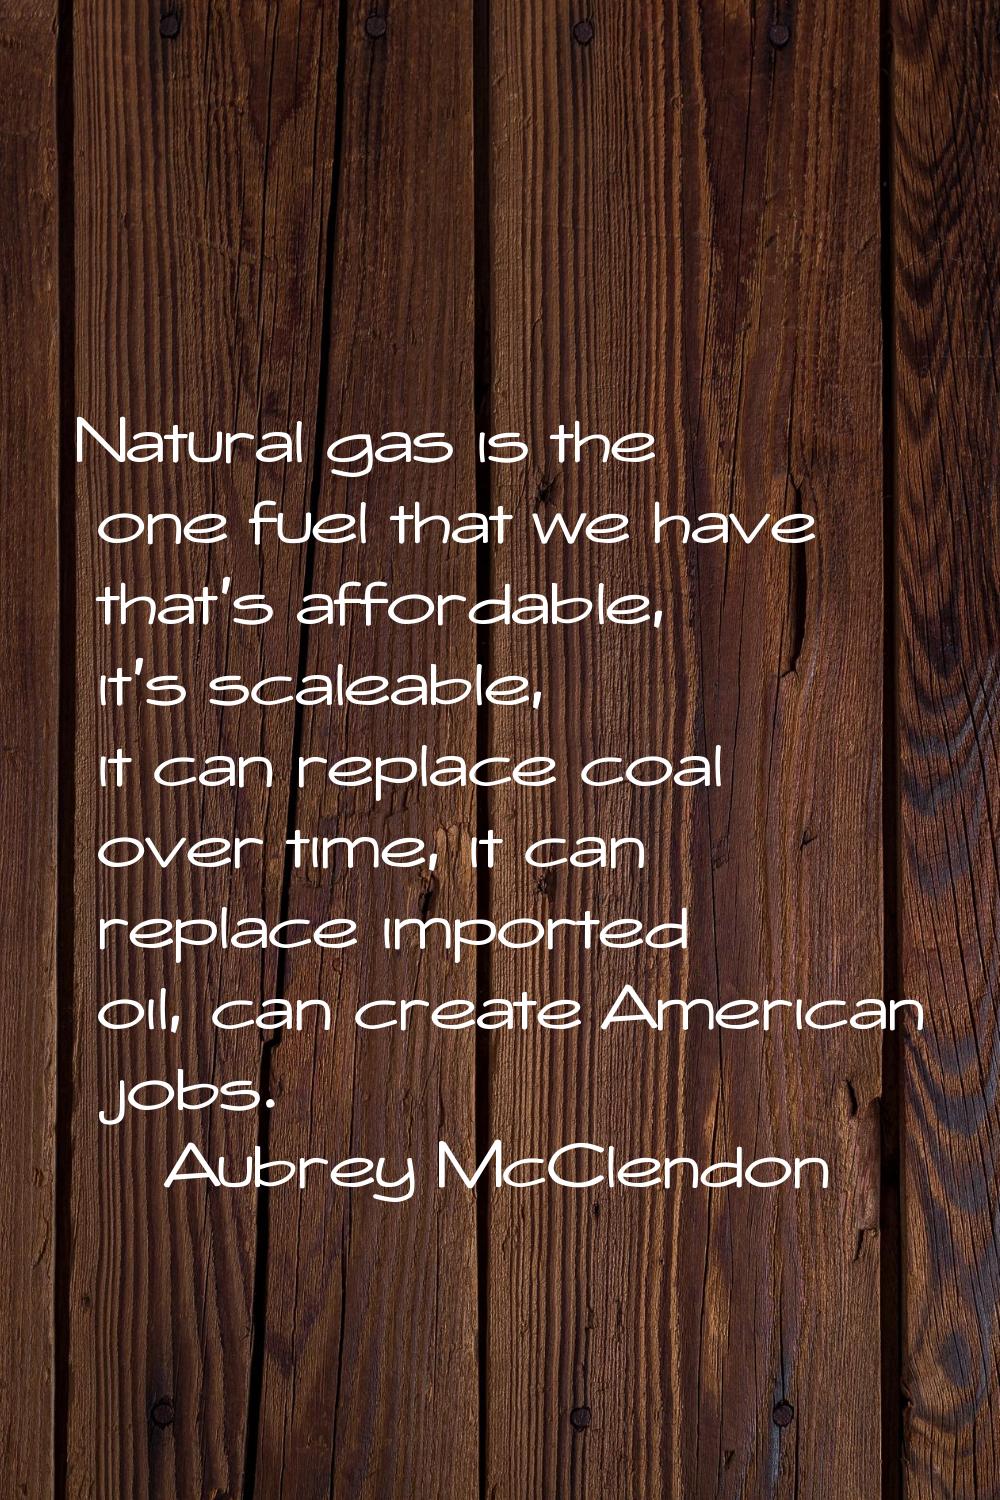 Natural gas is the one fuel that we have that's affordable, it's scaleable, it can replace coal ove